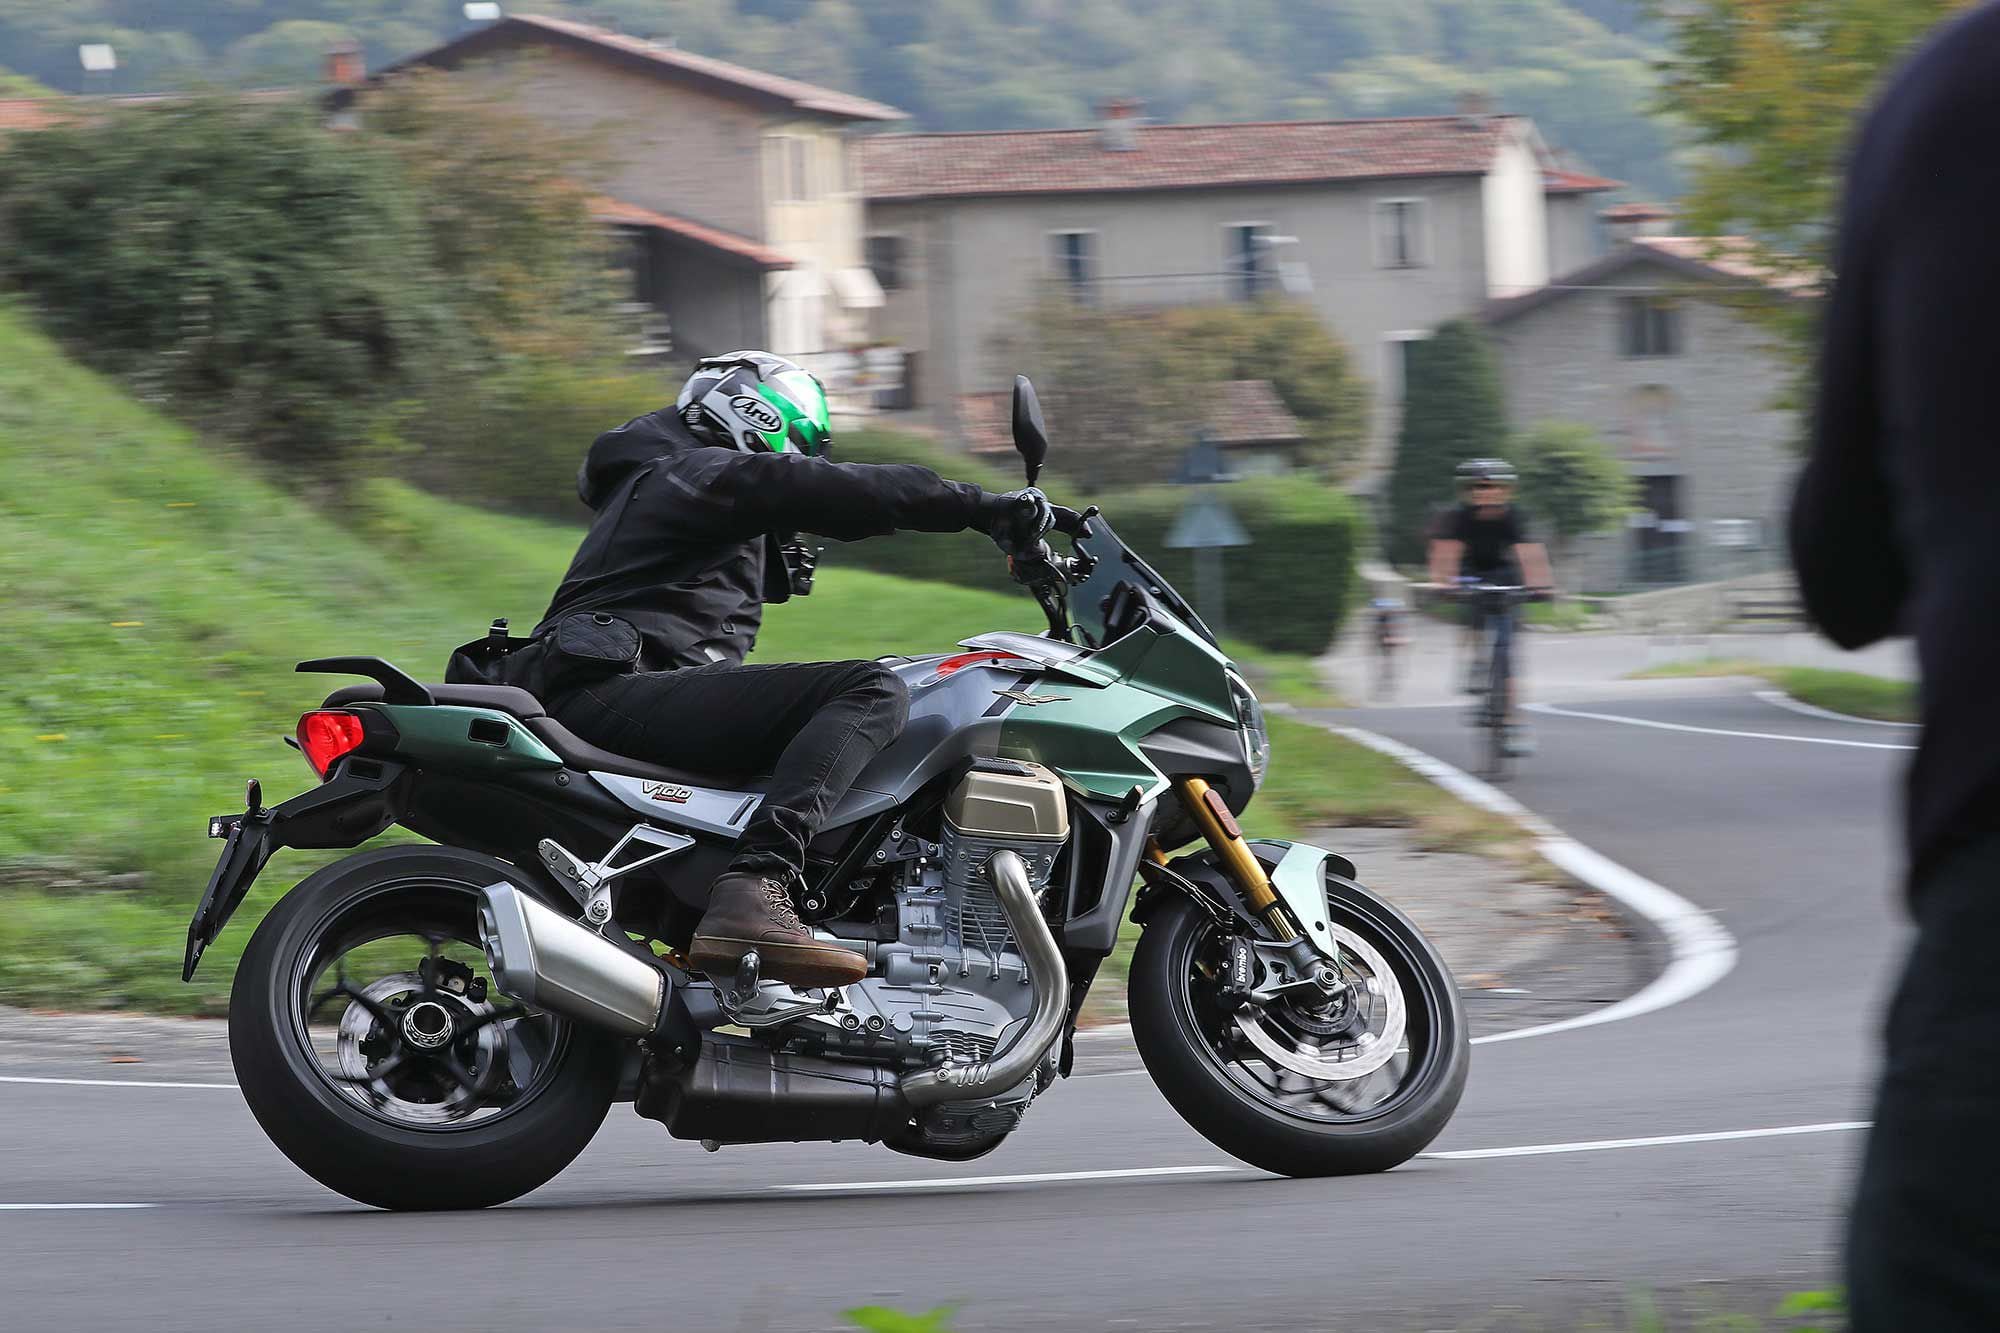 In spite of its 514-pound curb weight, the V100 Mandello is an agile streetbike.